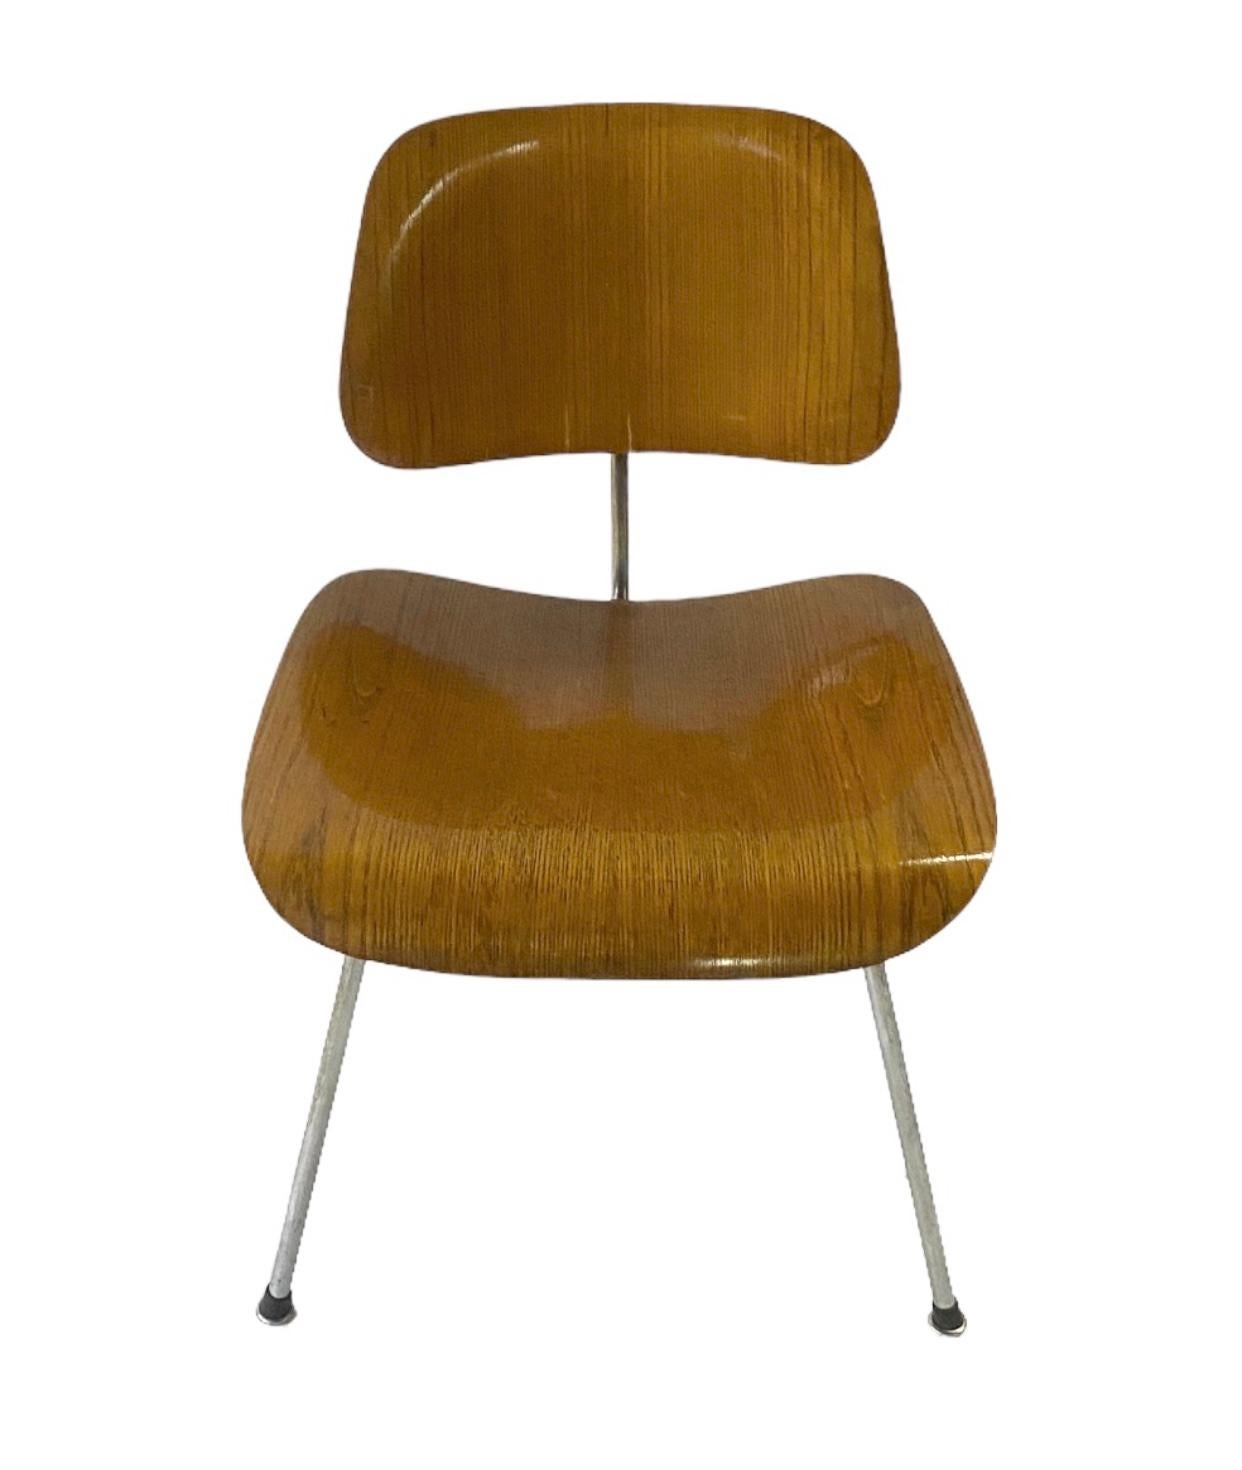 Mid-Century Modern Early Eames Dcm by Evans Products, circa 1946/1947